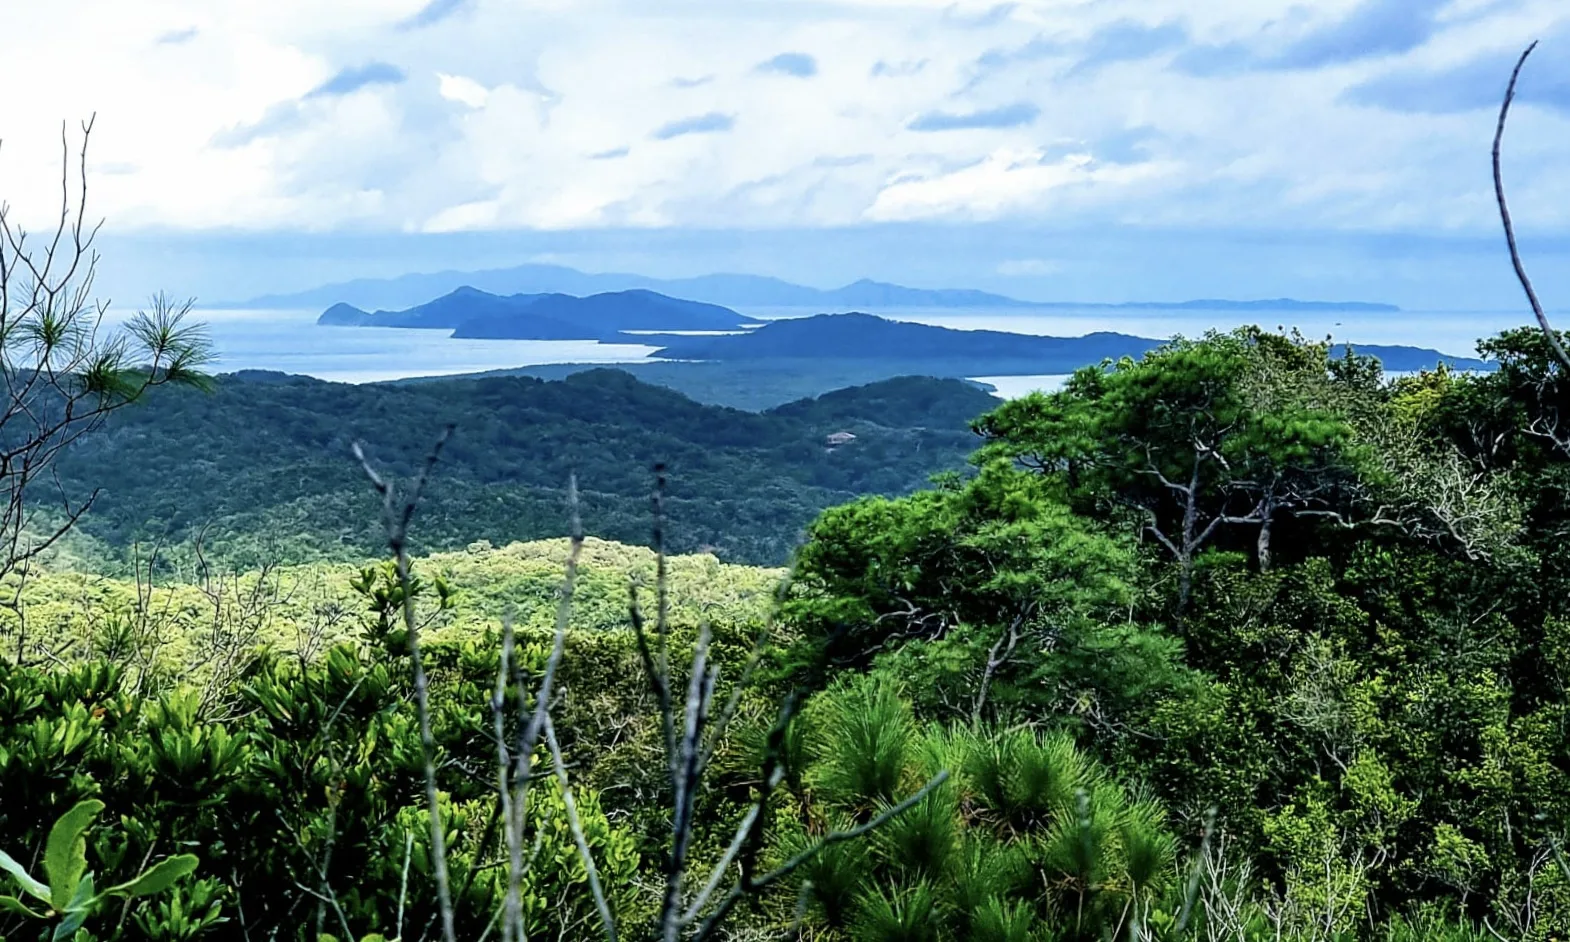 Things to do in Camp Bay - Hiking at Port Royal National Park